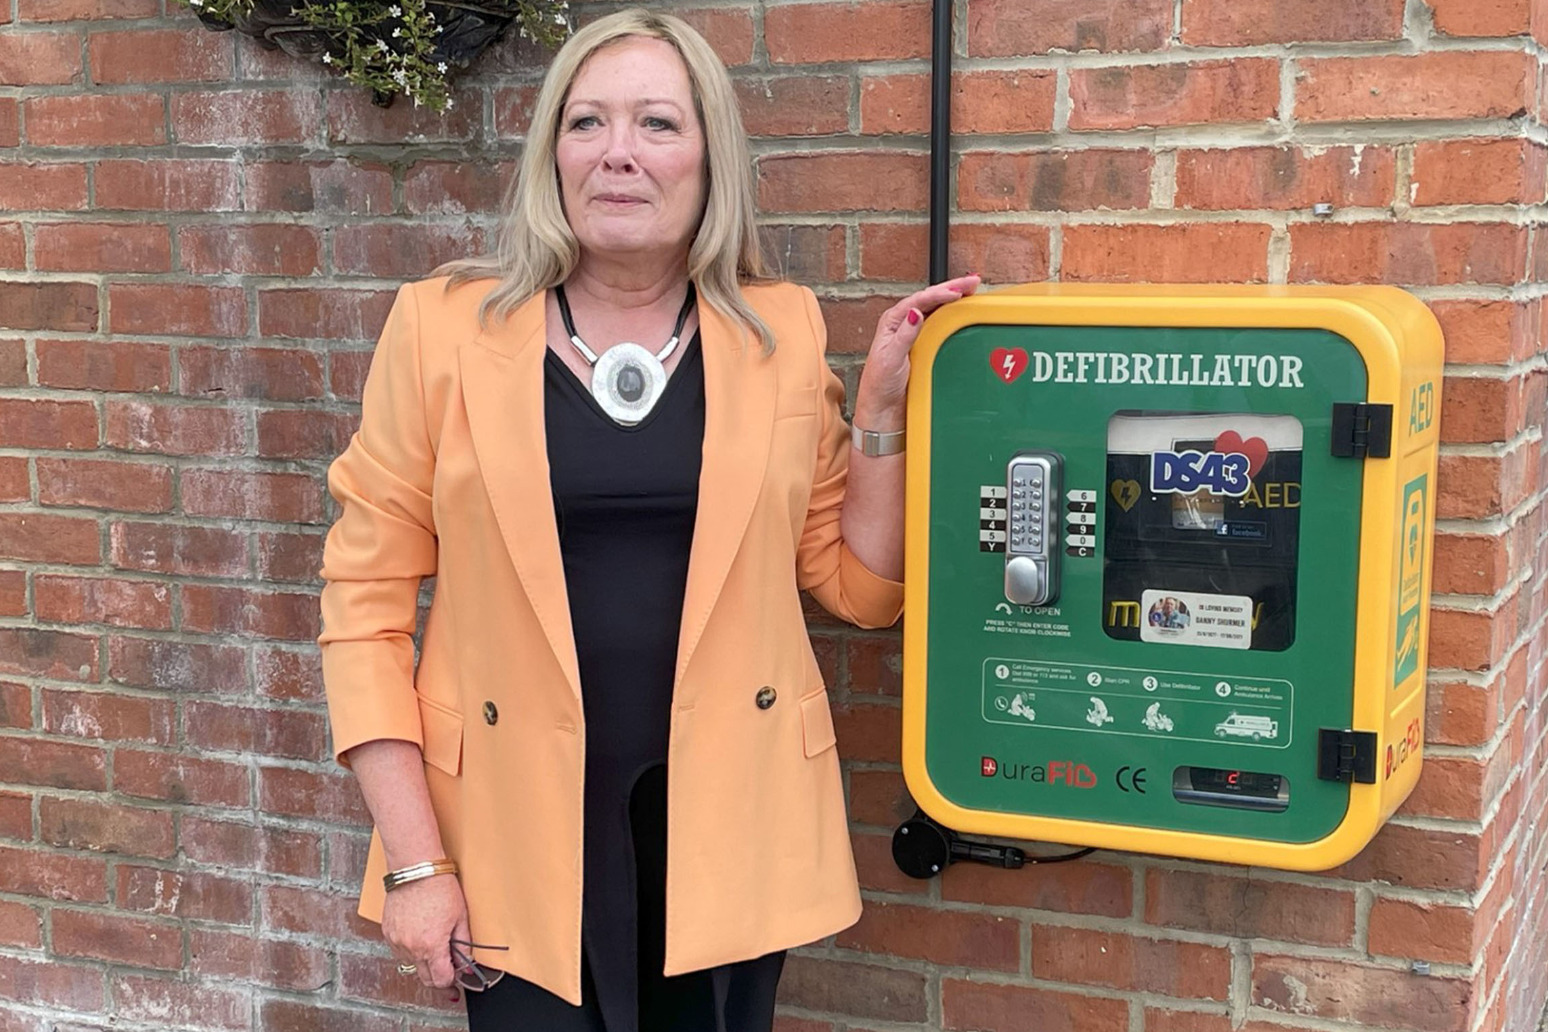 Campaigners call for more equal access to defibrillators 